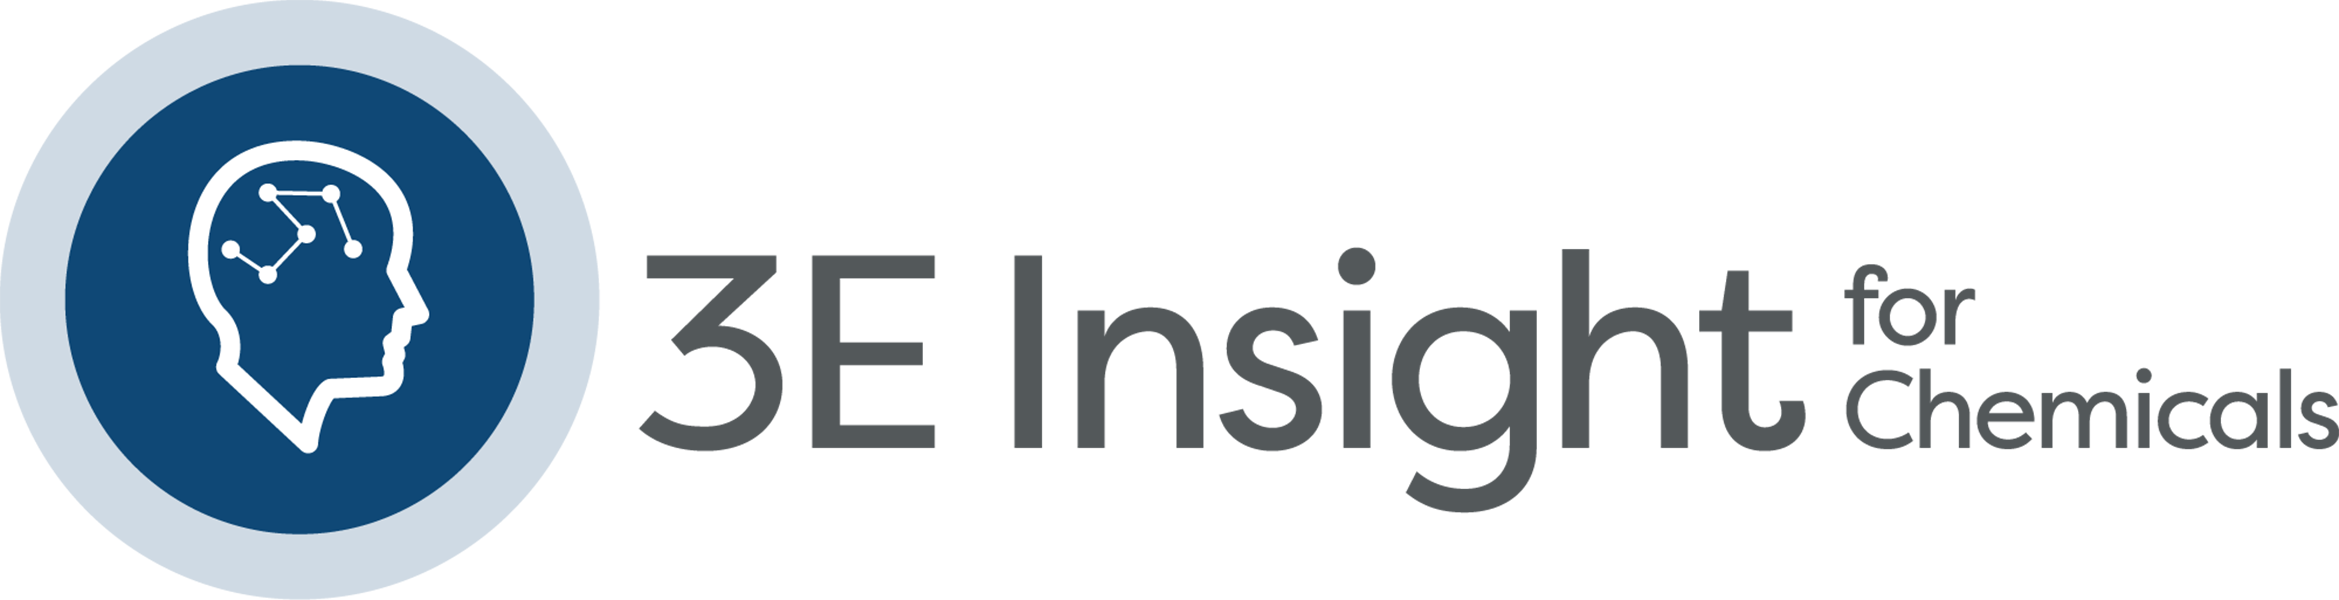 3E logo for 3E Insight for Chemicals compliance software product